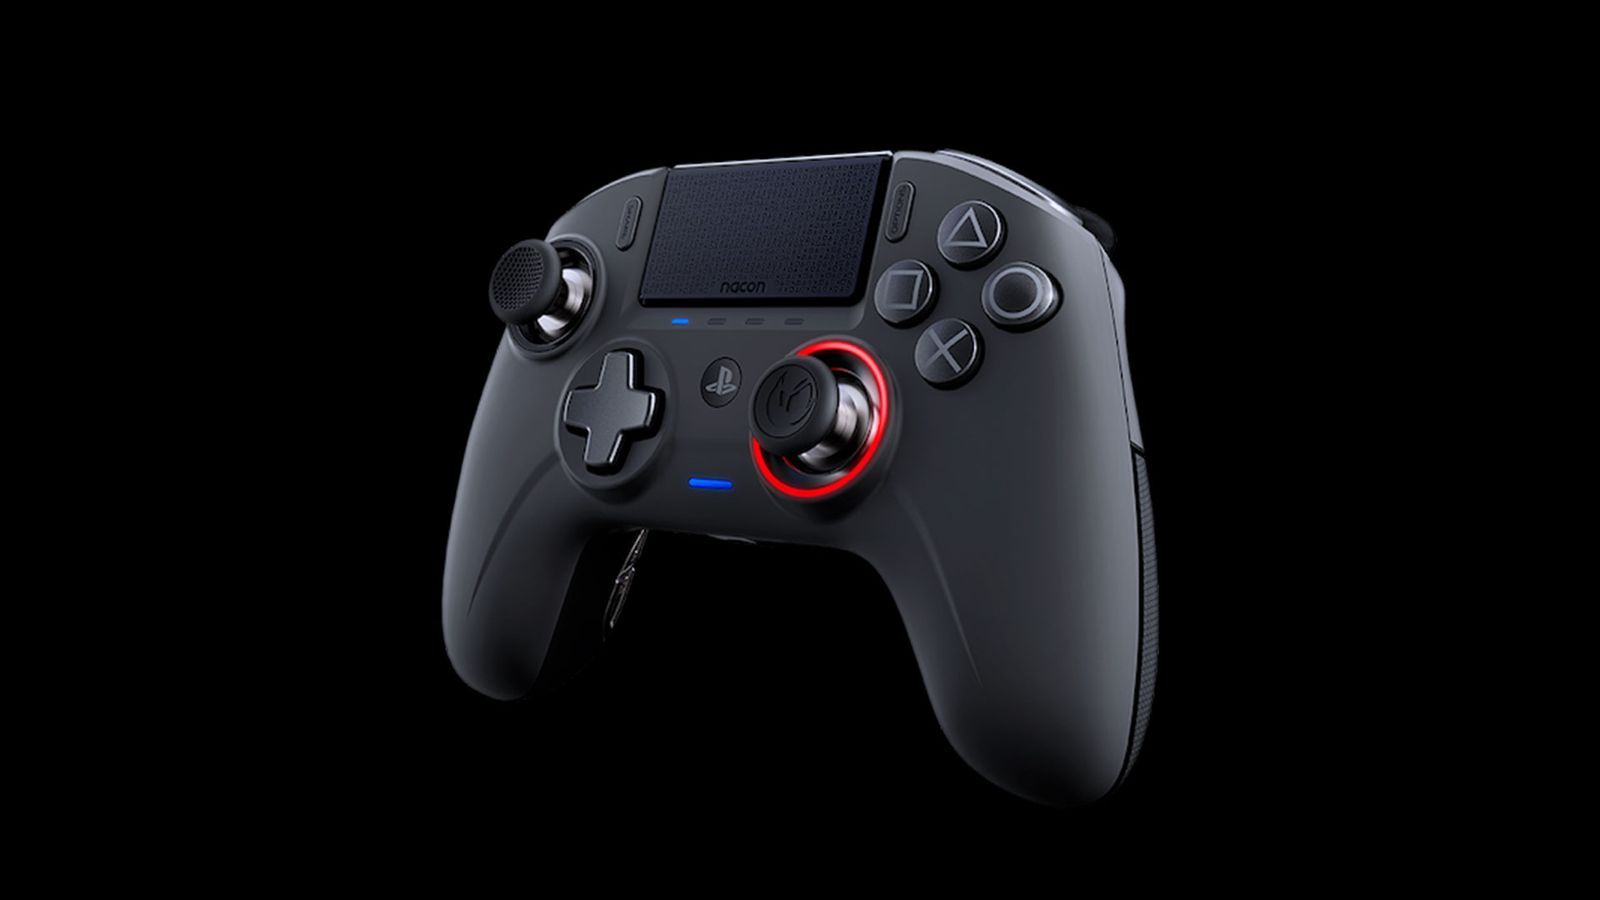 Nacon Revolution Unlimited Pro product image of a black gamepad with a red ring around the right thumbstick.